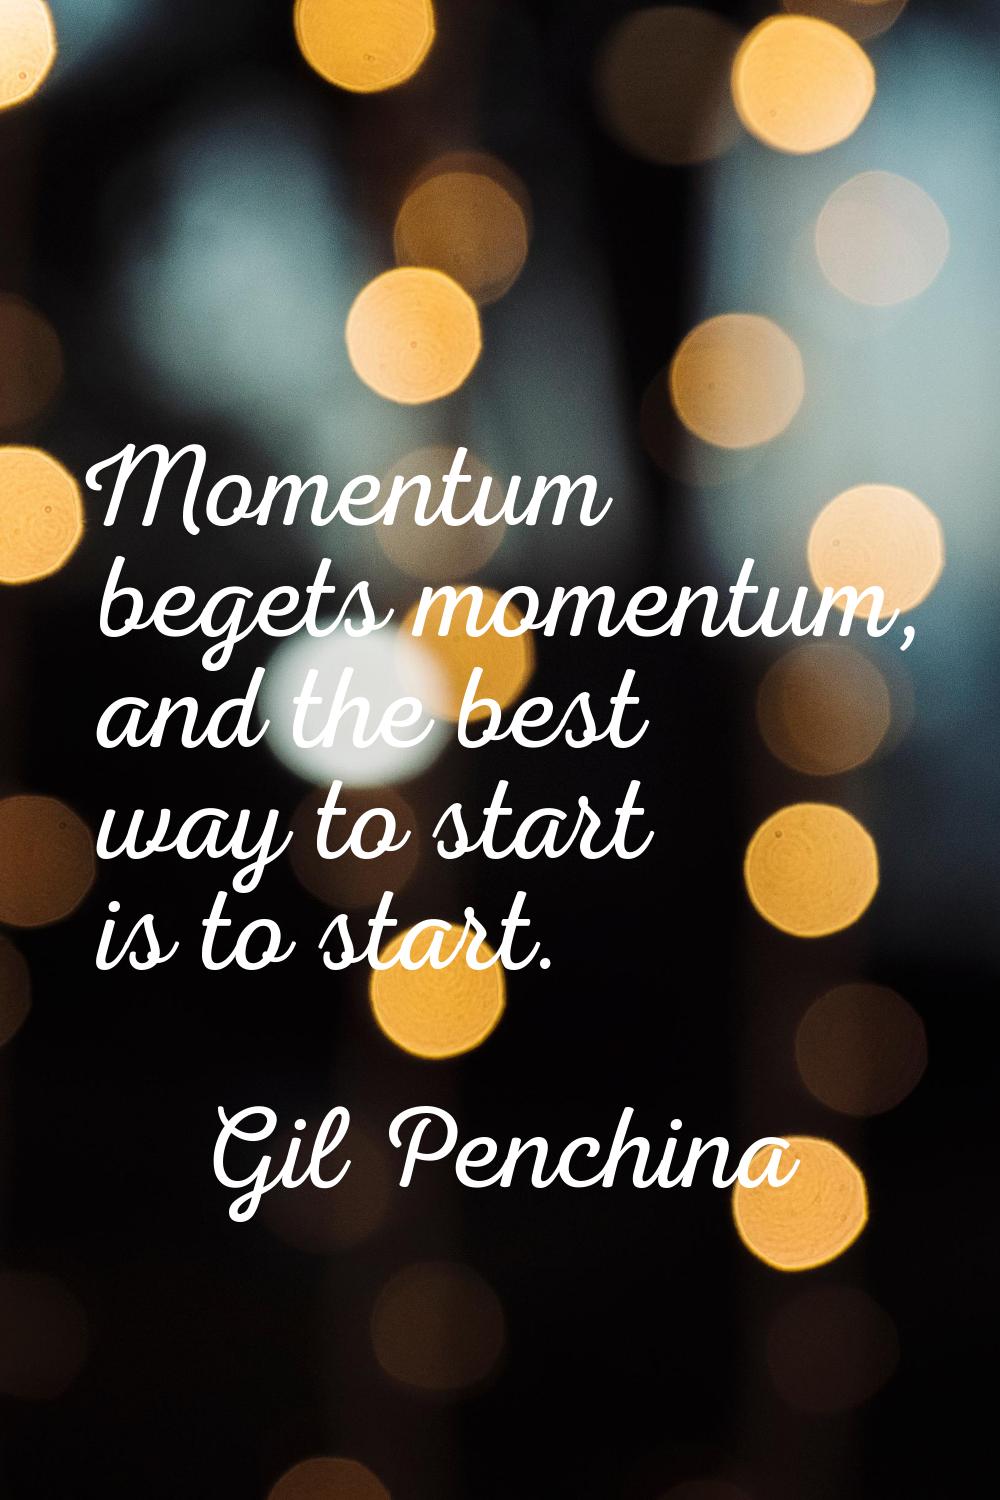 Momentum begets momentum, and the best way to start is to start.